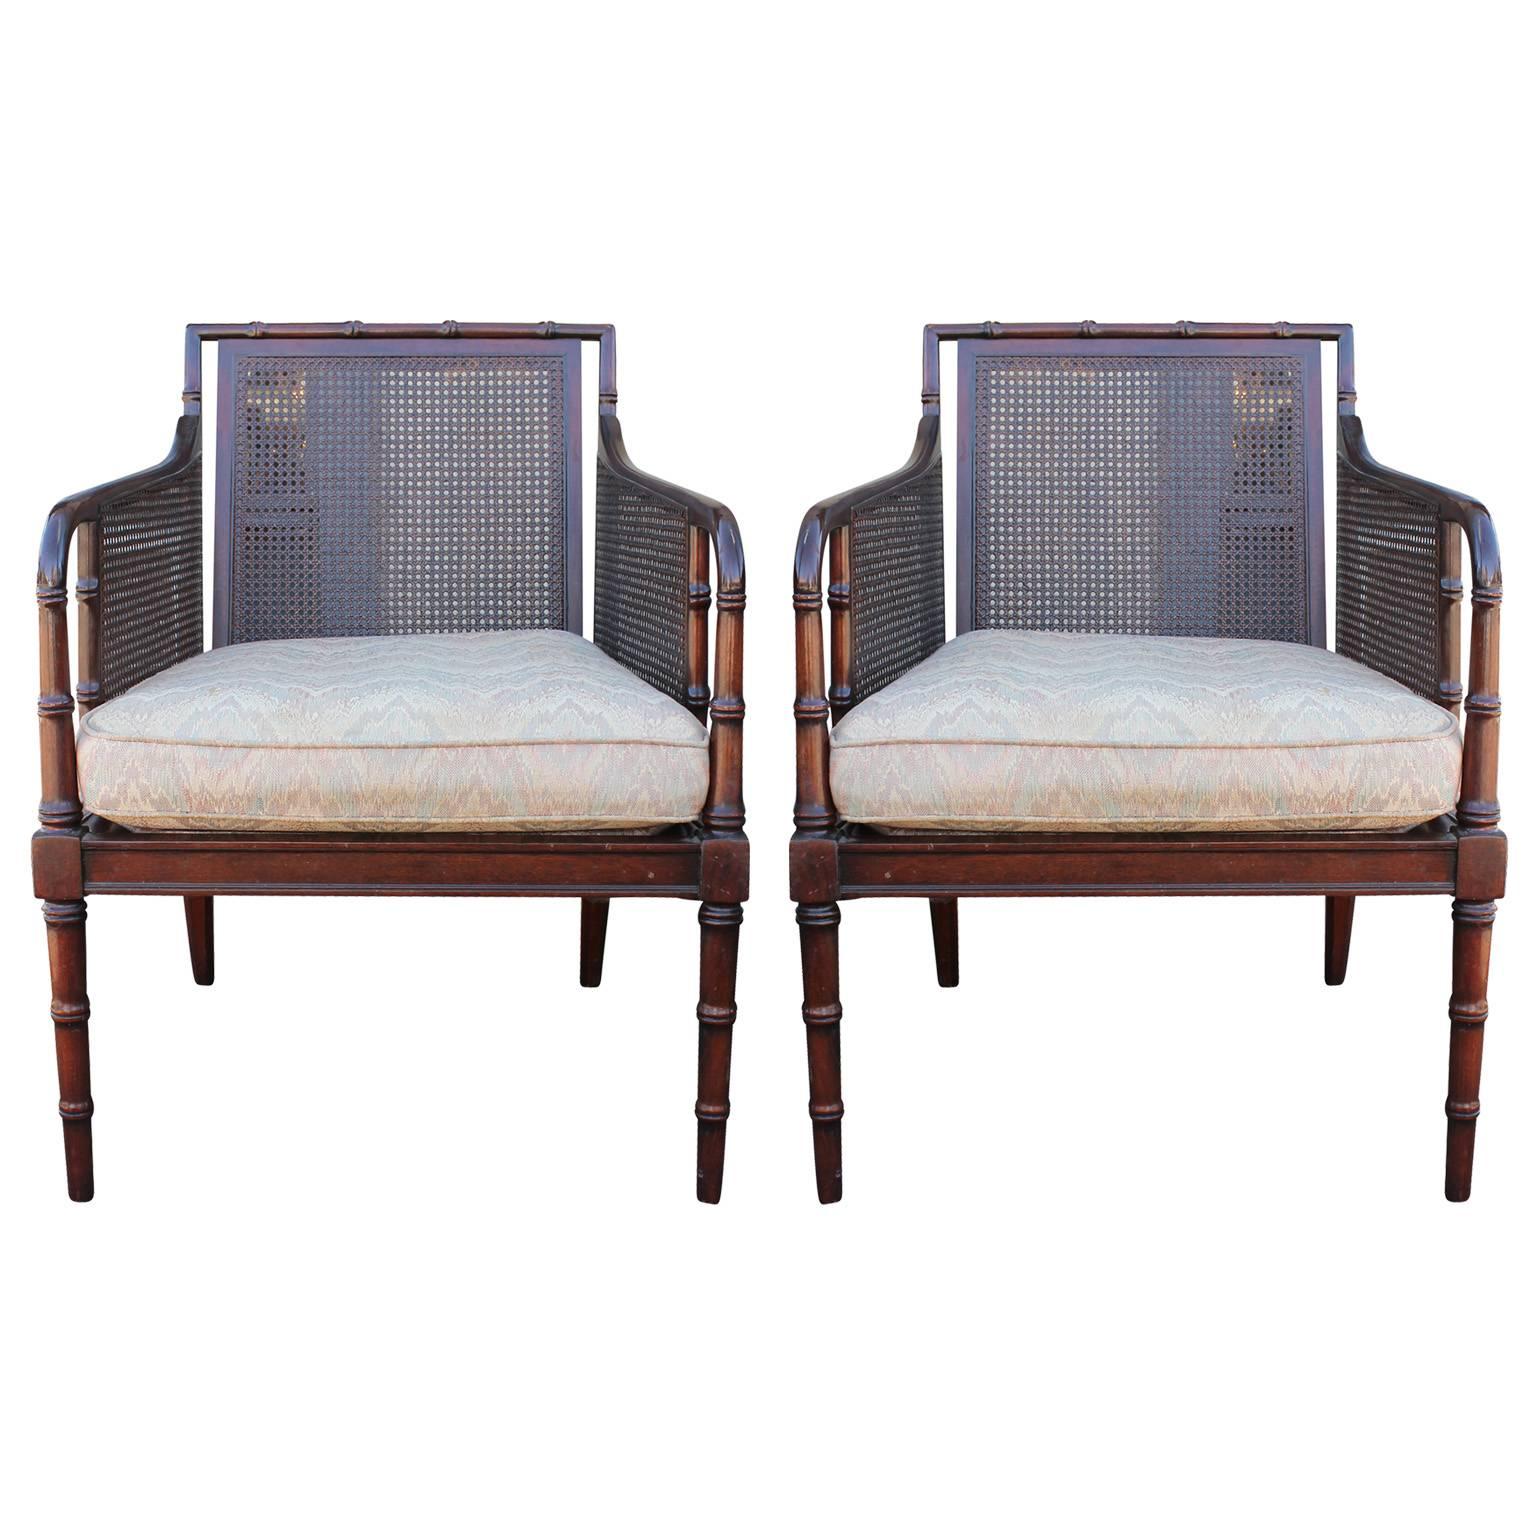 Bamboo and Cane Regency Style Lounge Chairs